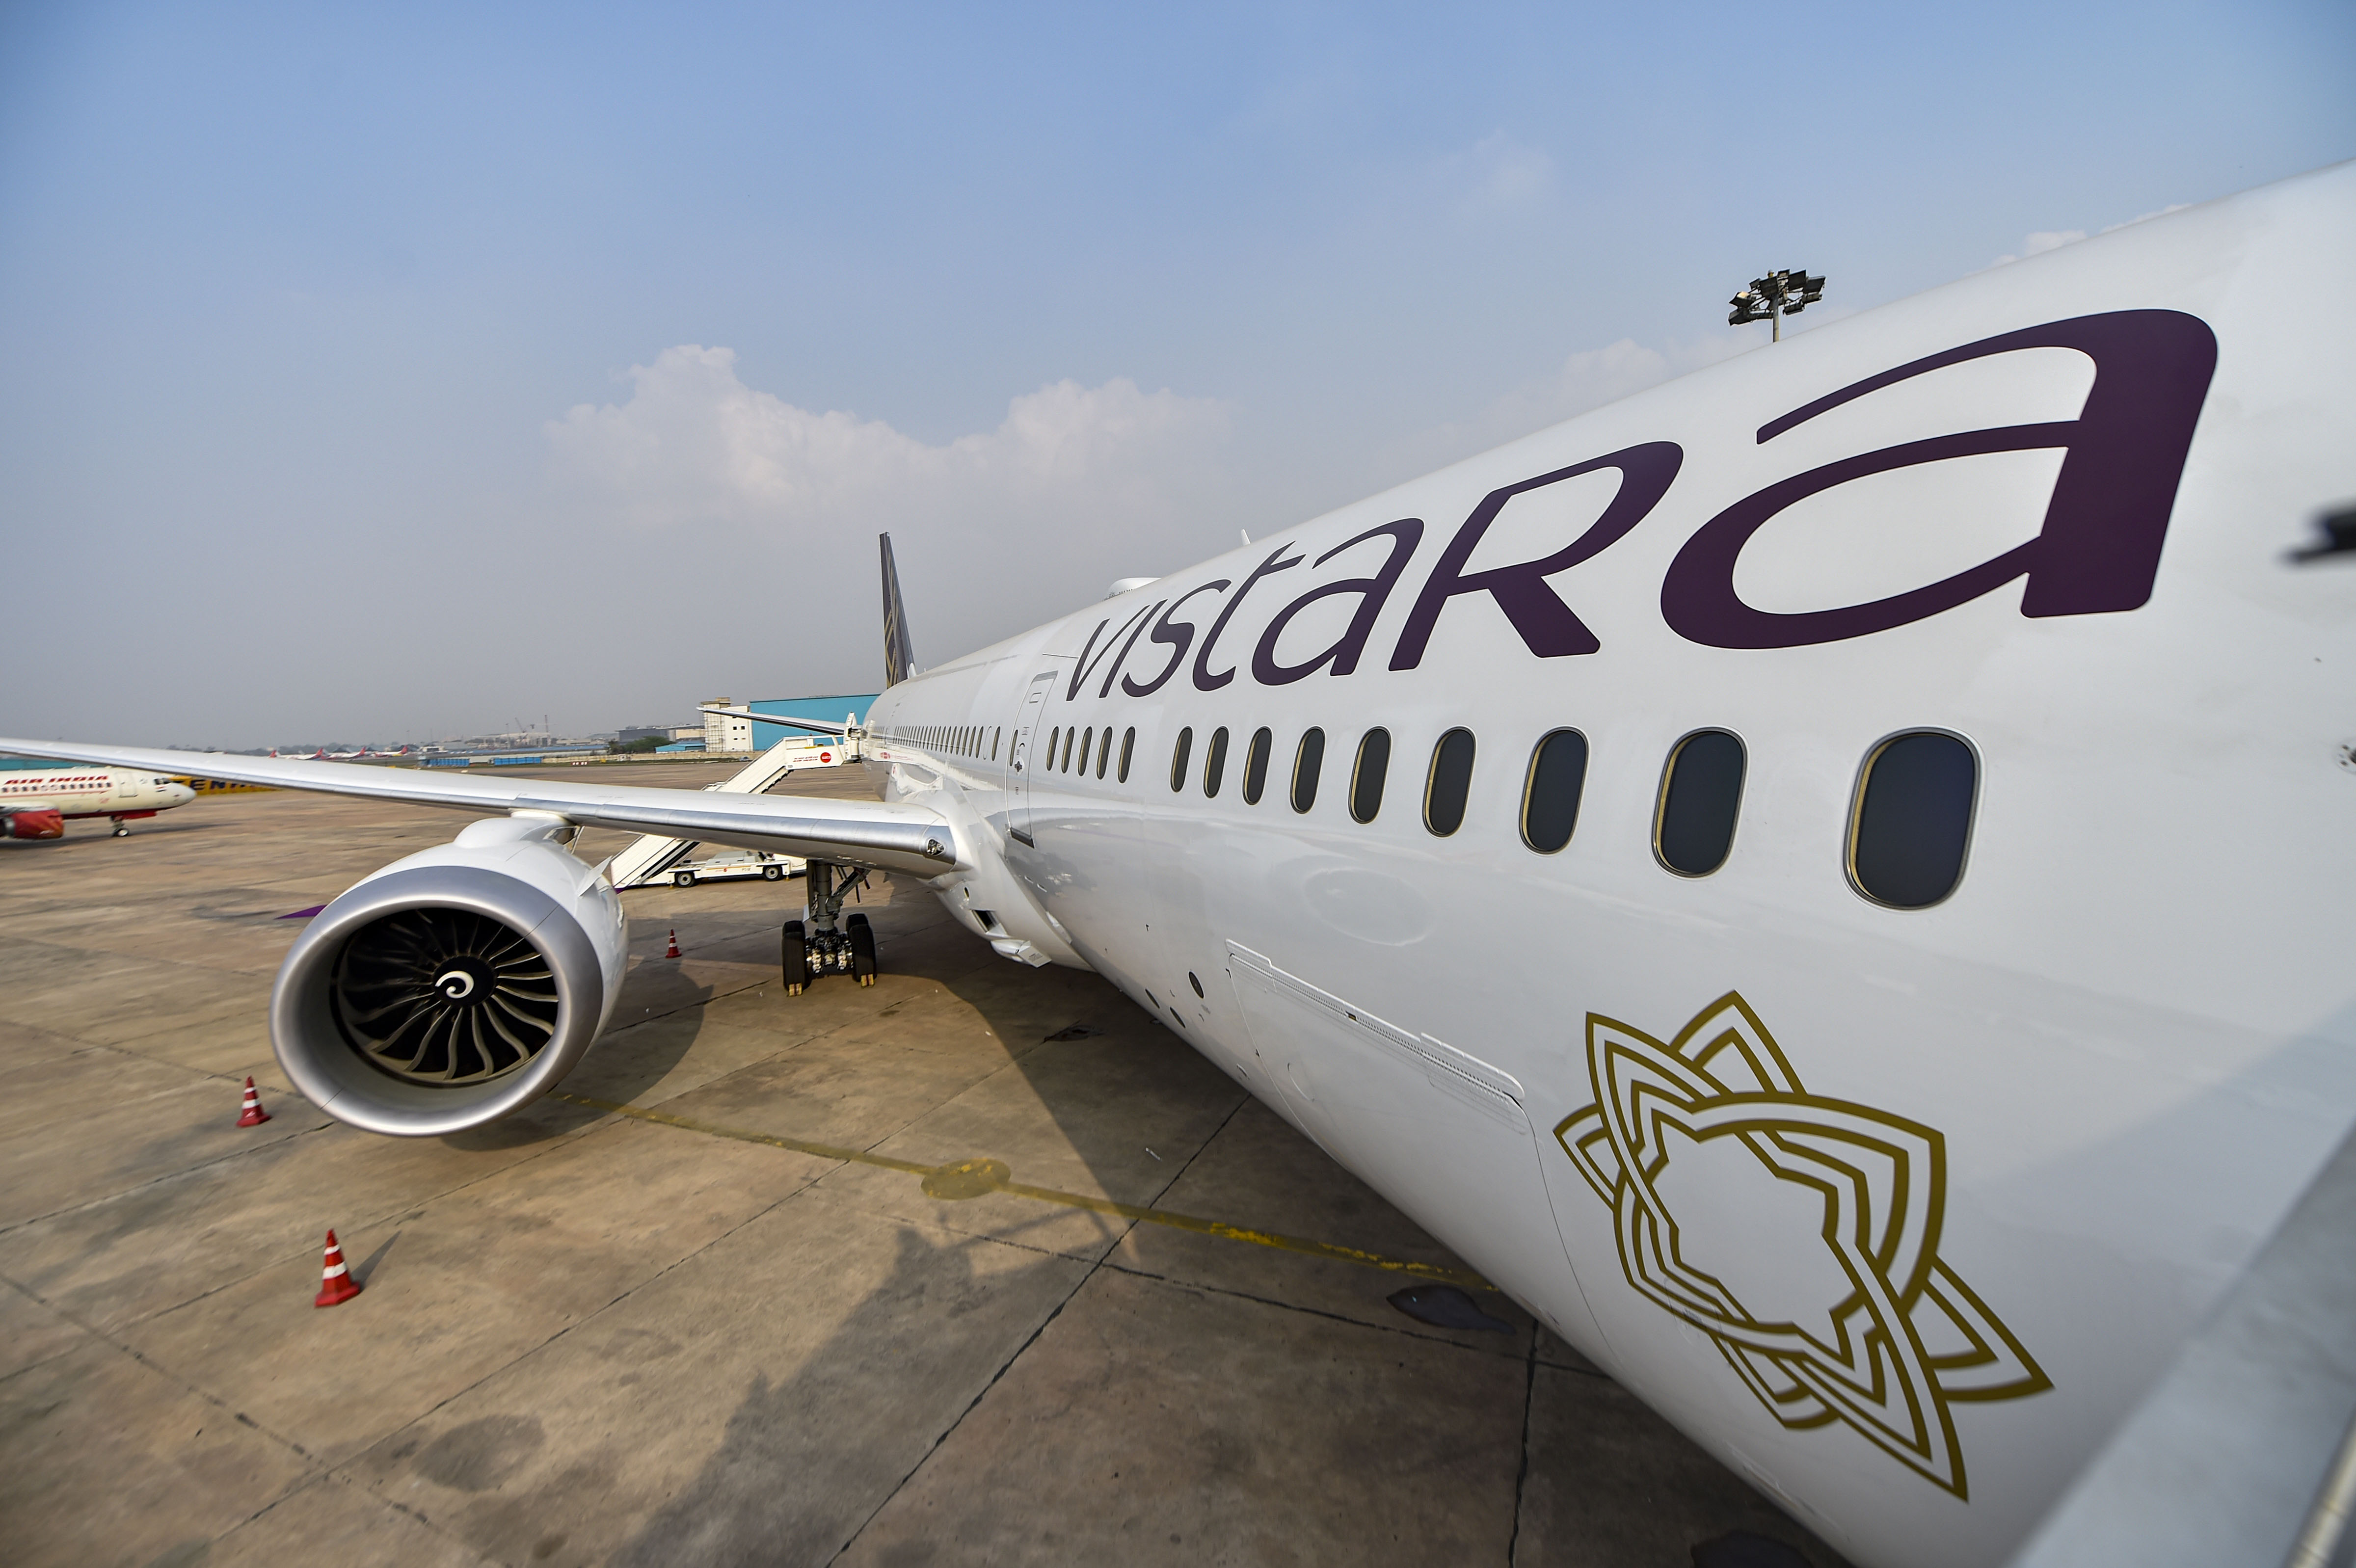 Vistara flight from Mumbai diverted to Lucknow due to thunderstorm over Delhi airport